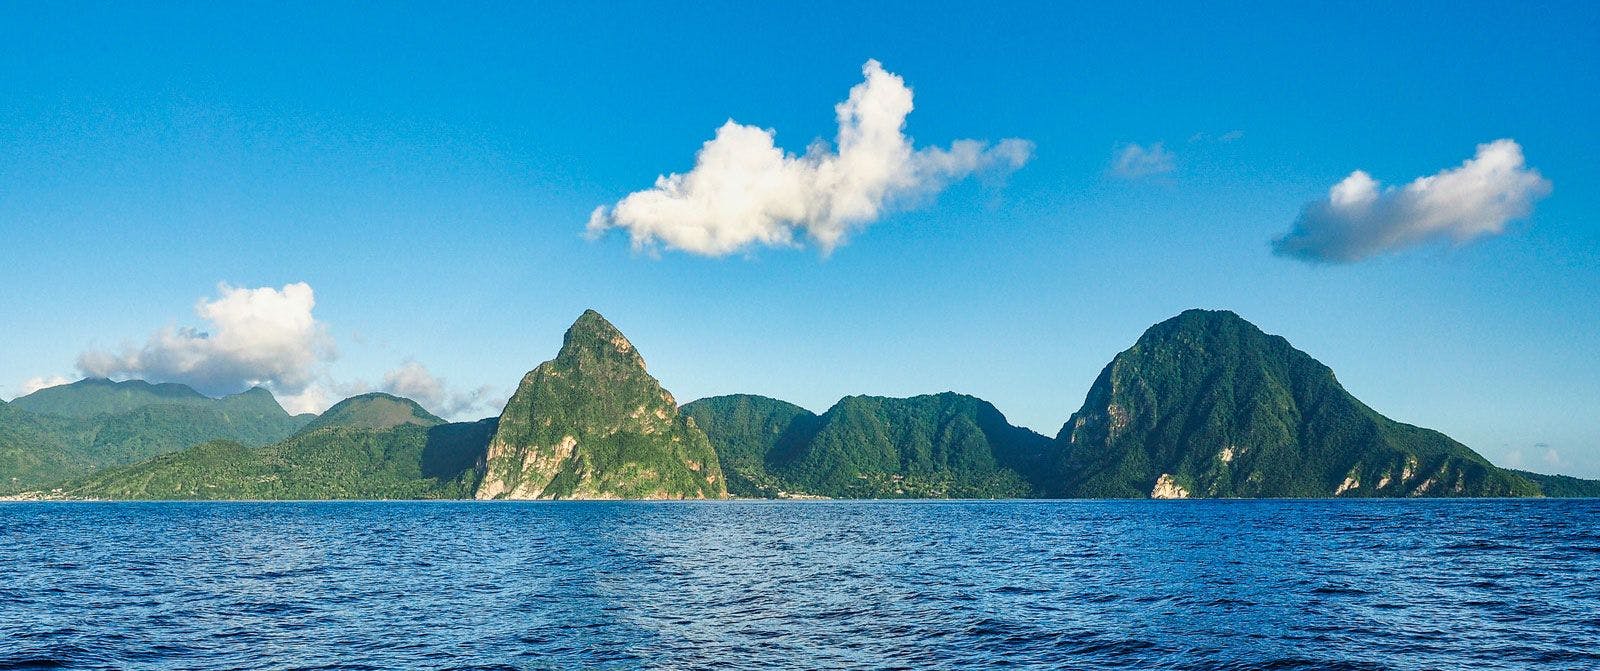 Saint Lucia and a view of the Pitons from the sea.